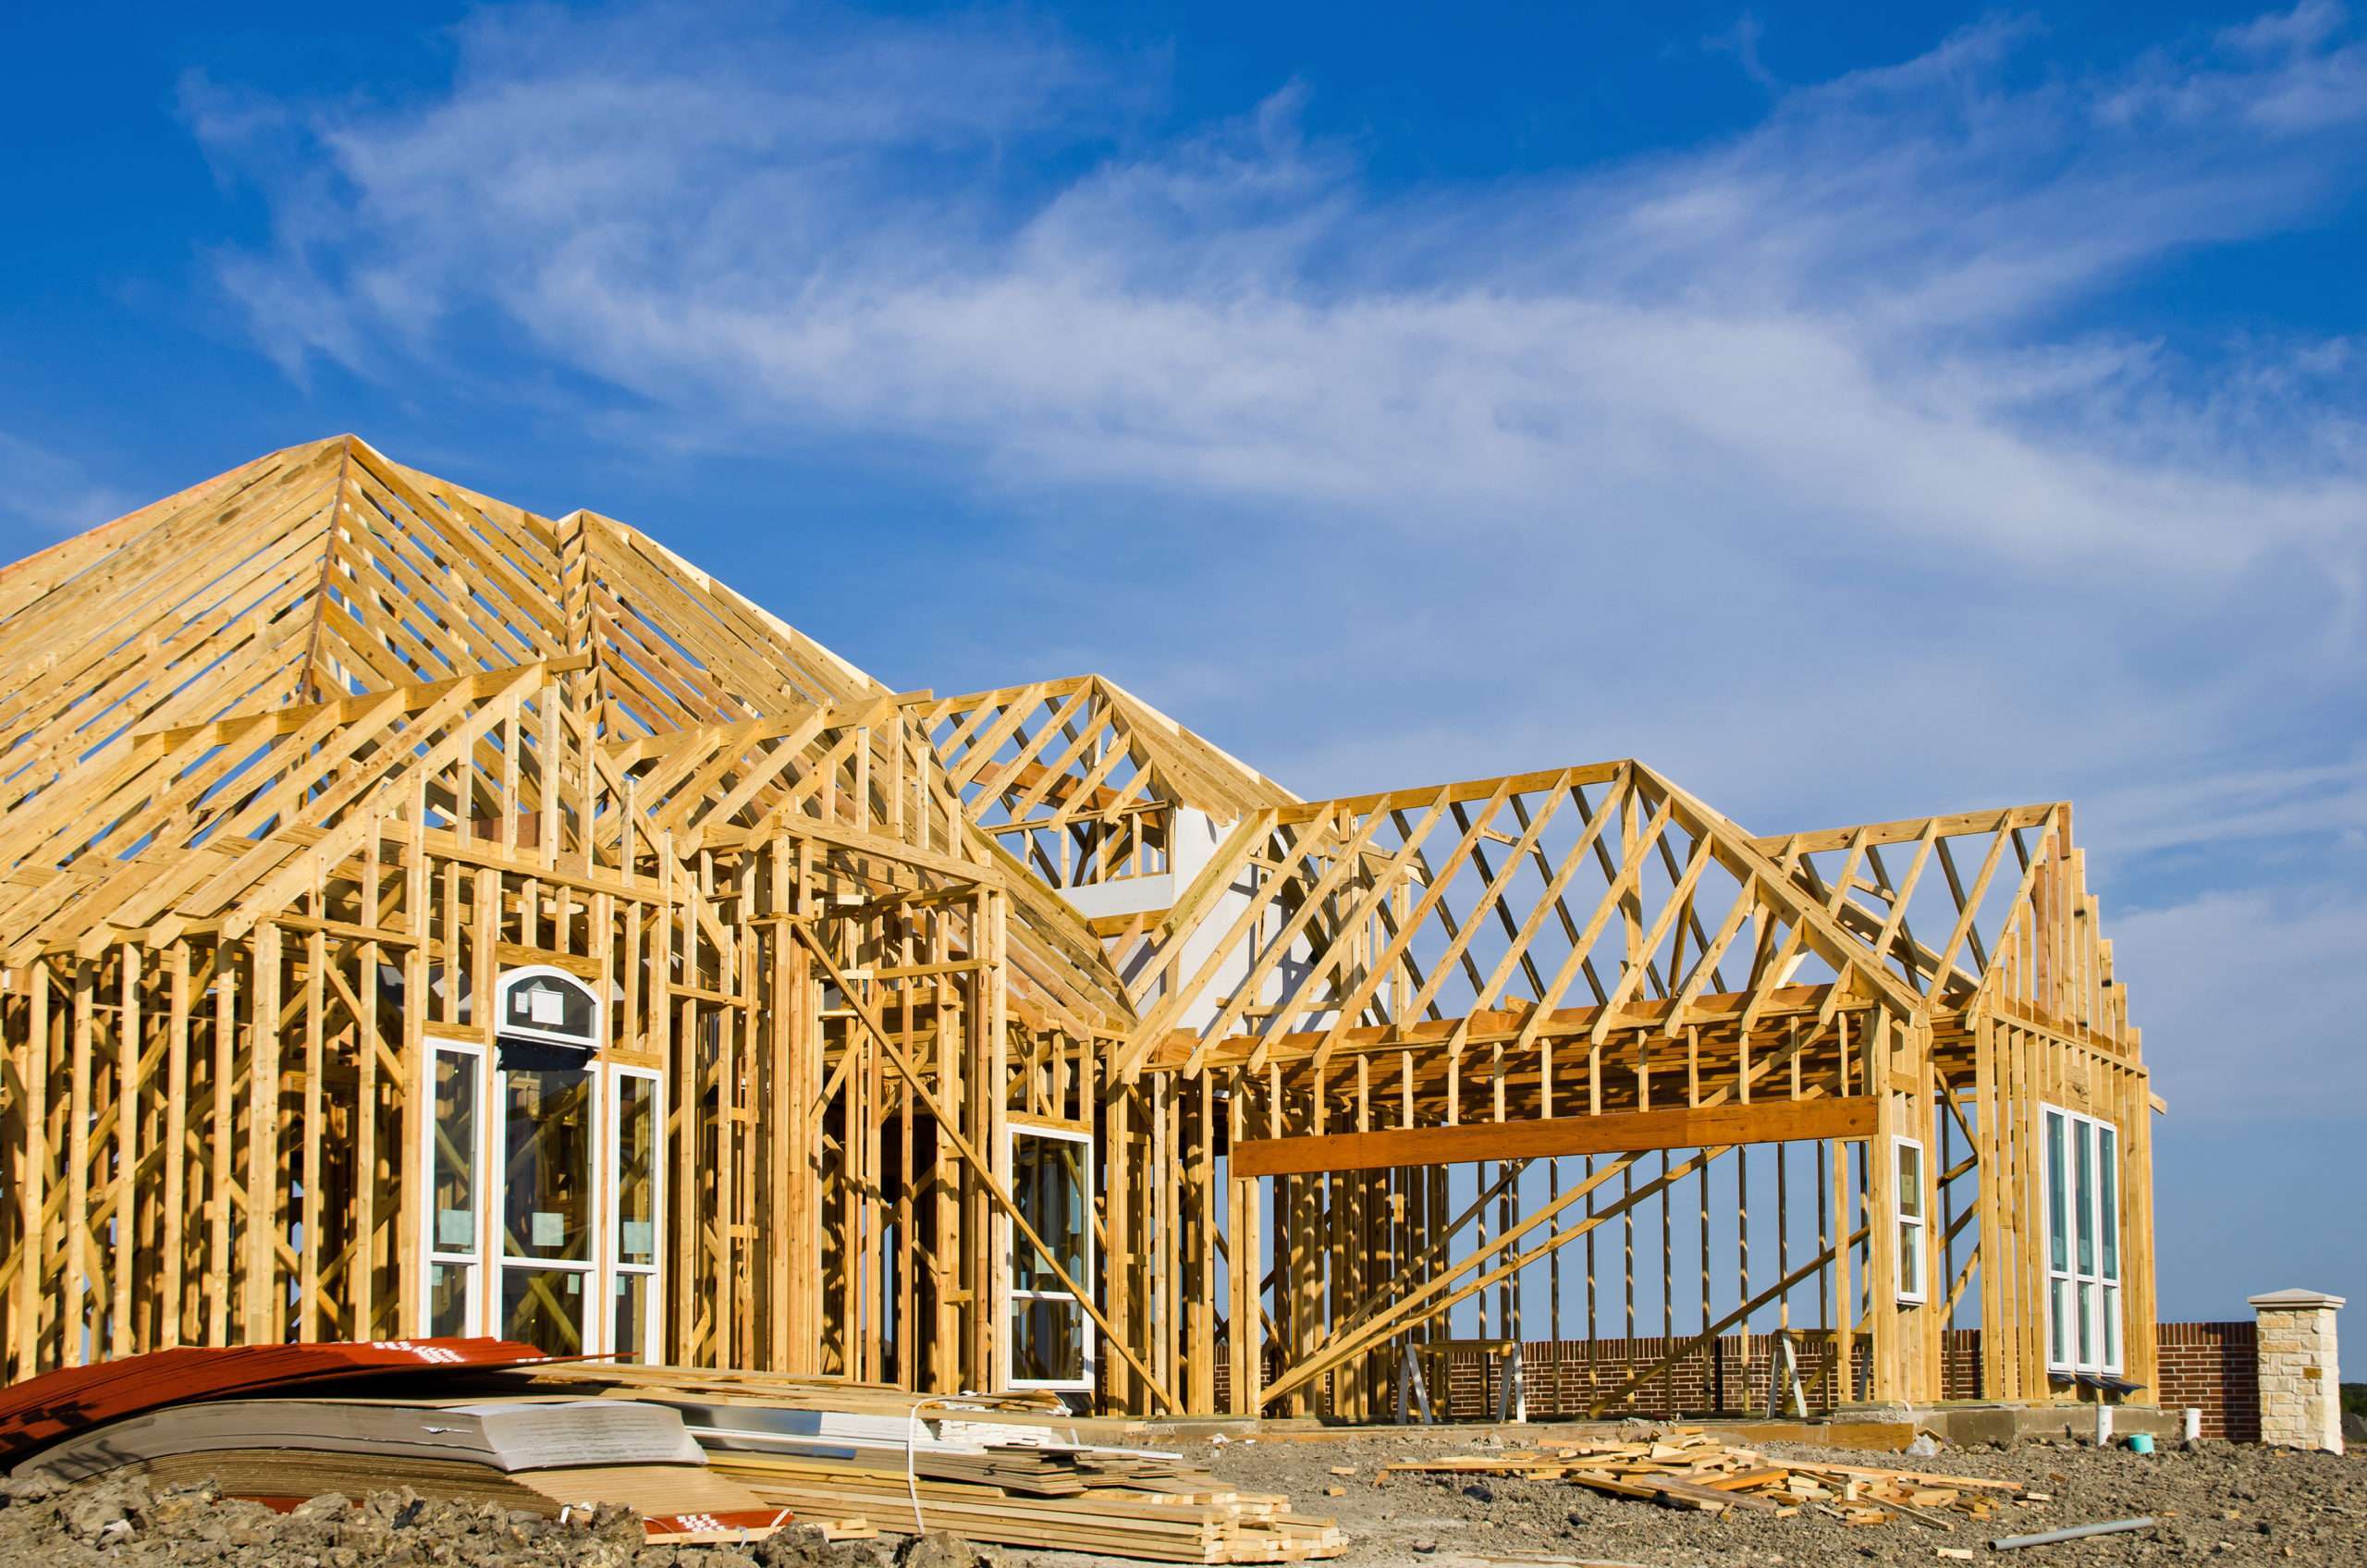 The LegalShield Housing Construction and Housing Sales Indices